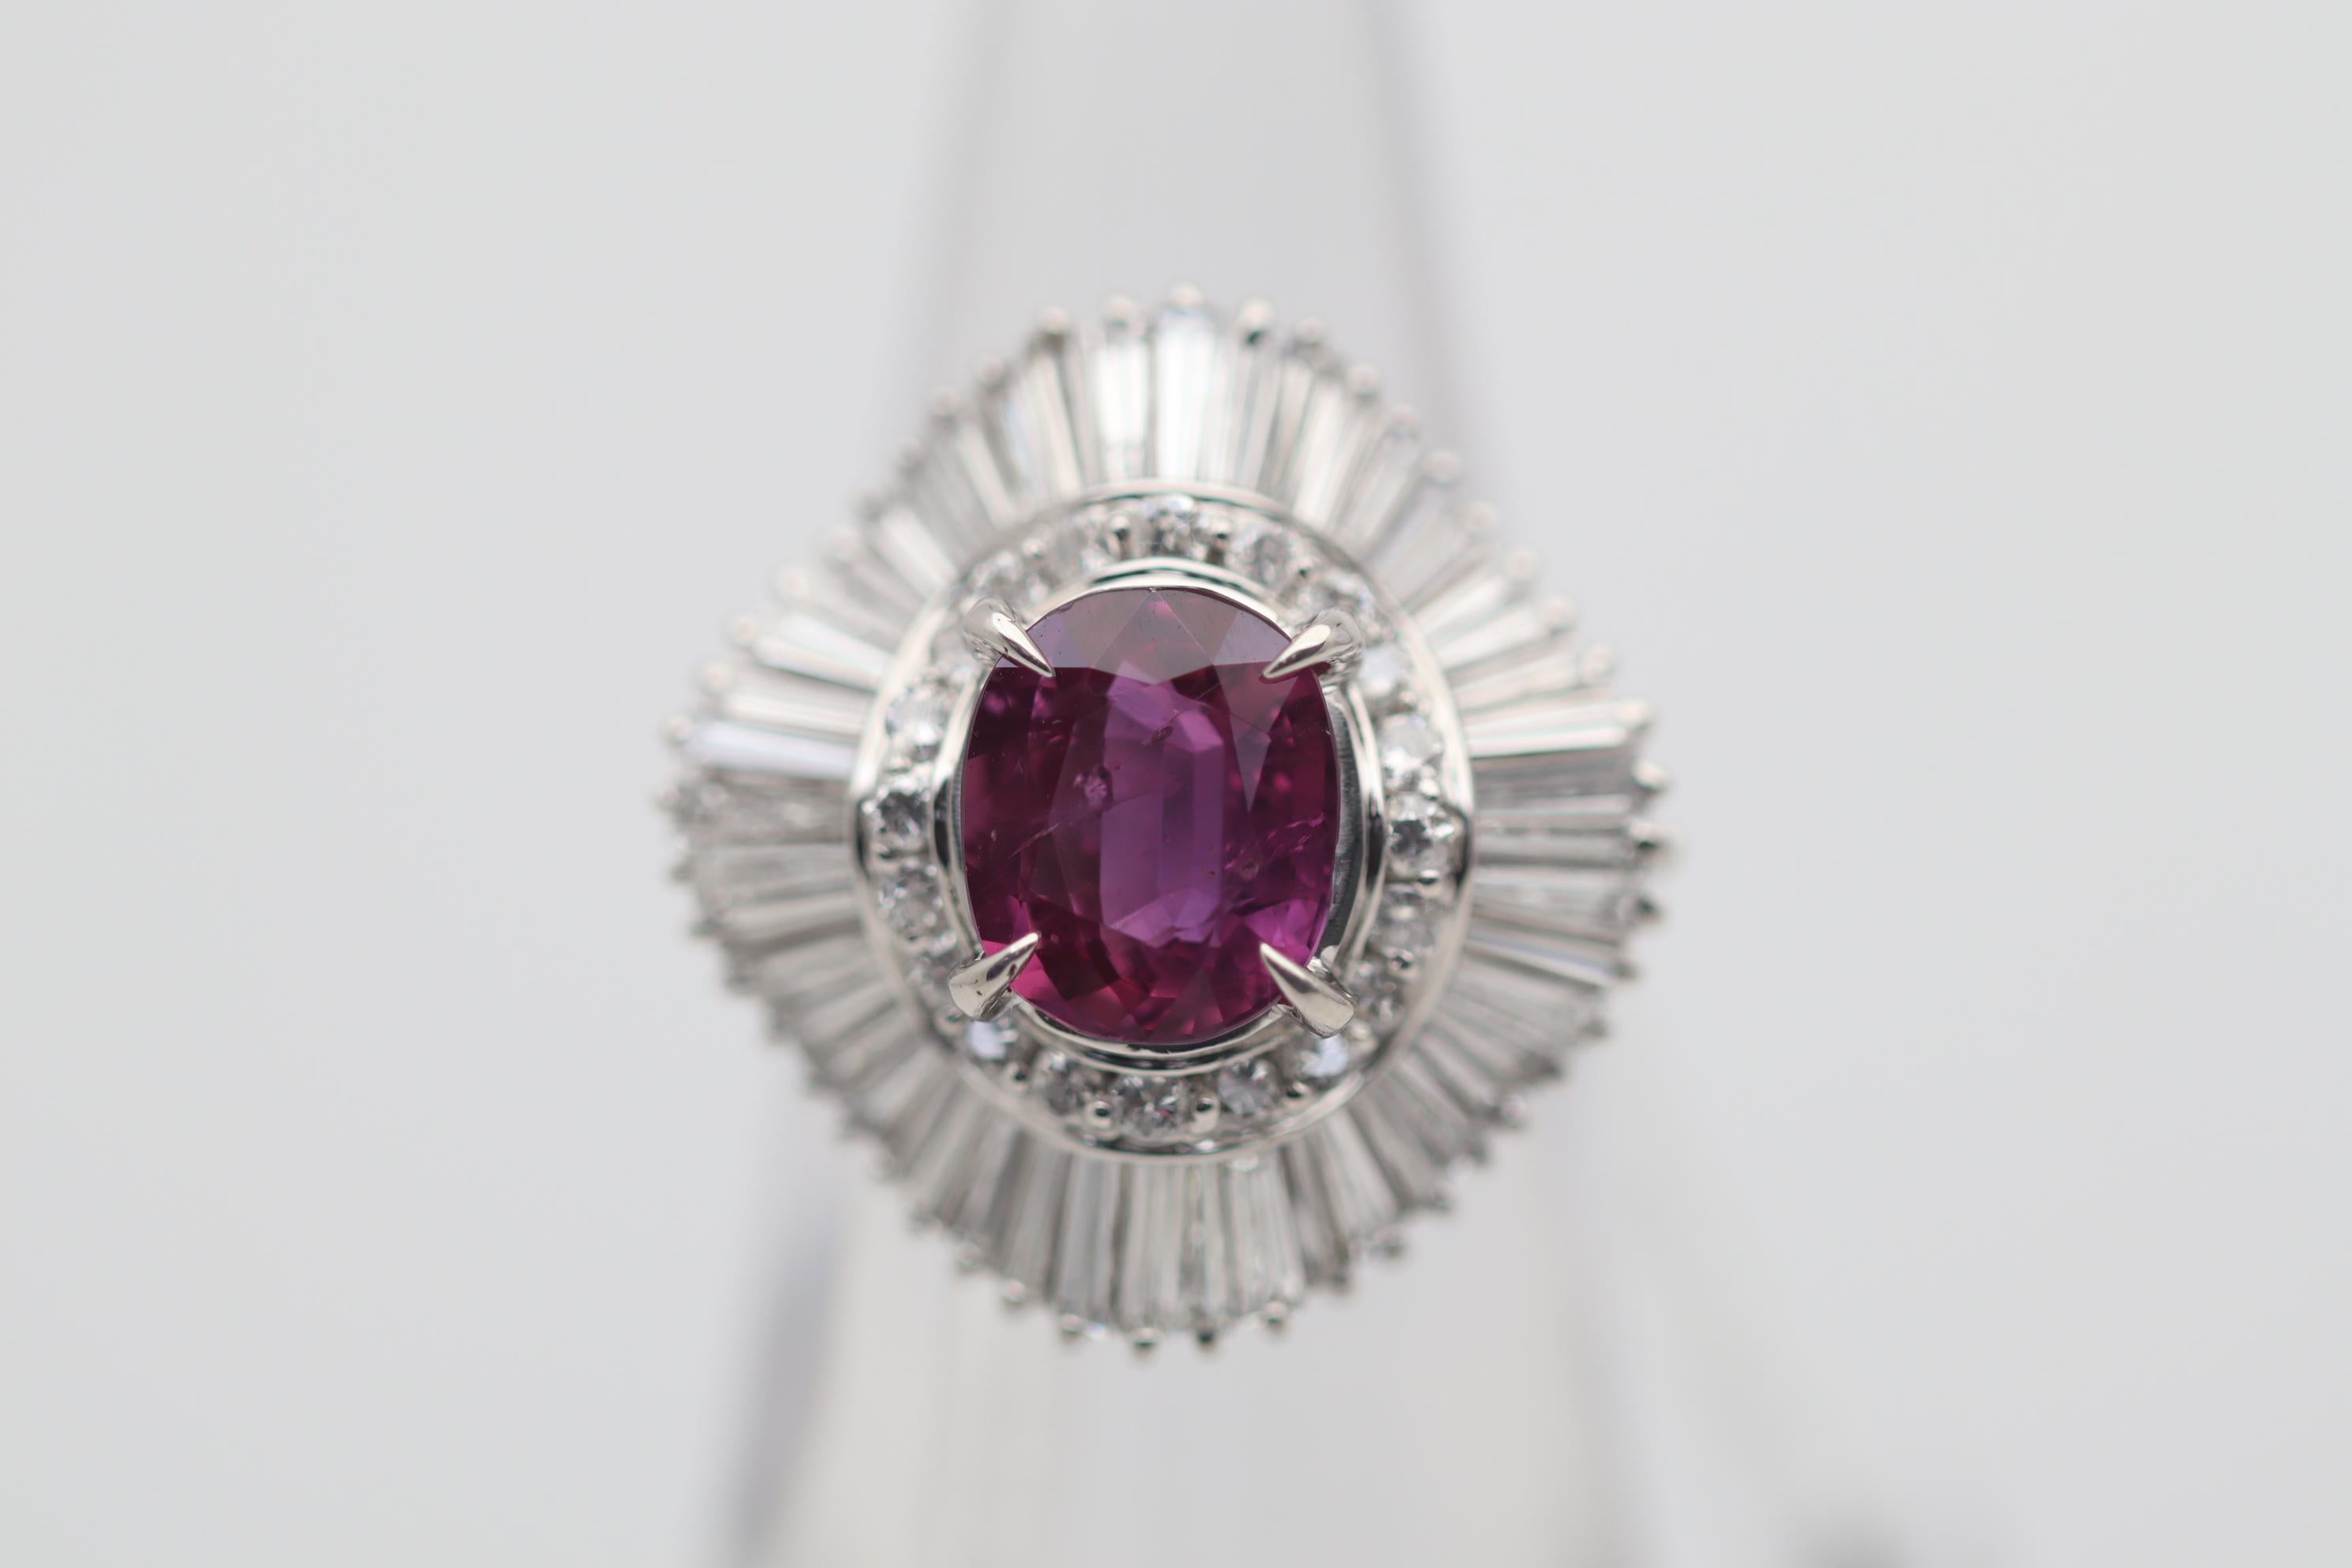 A classic ballerina style ring featuring a large 3.16 carat ruby! It has an oval shape with a bright rich color. It is complemented by 3.08 carats of baguette-cut and round brilliant-cut diamonds spiraling around the ruby. Hand-fabricated in